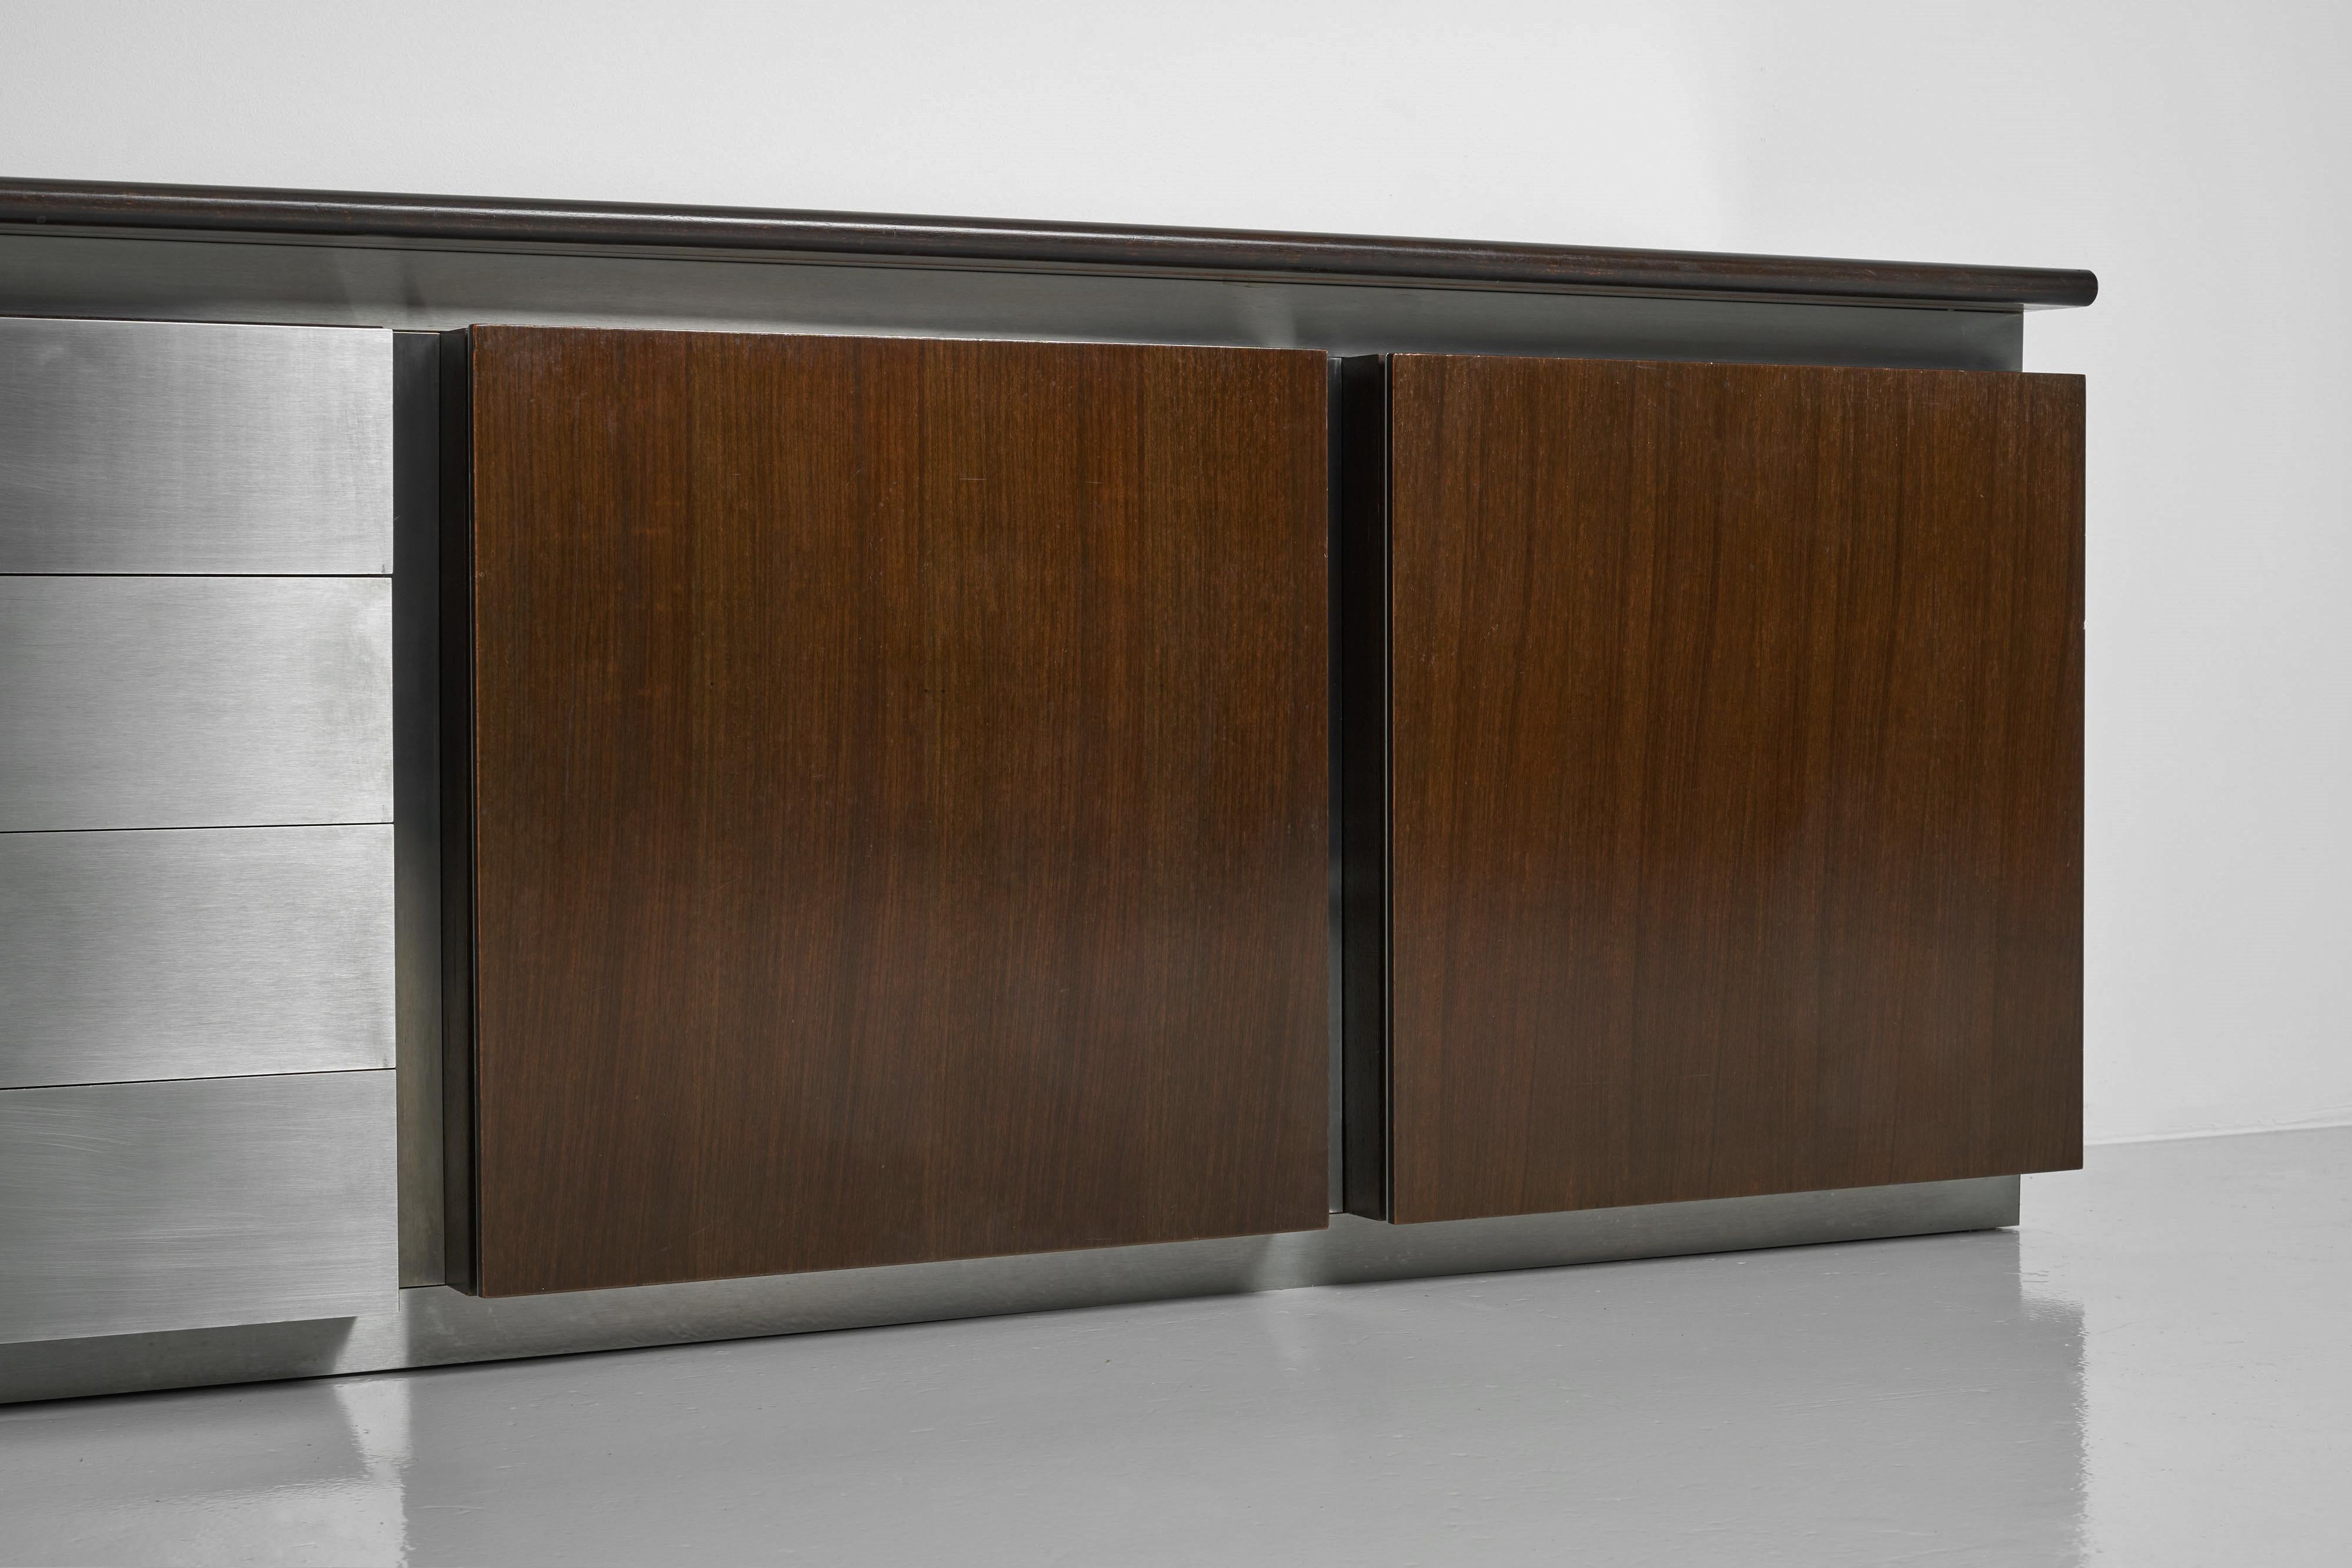 Large Gouju sideboard designed by Giotto Stoppino and manufactured by Acerbis in Italy 1977. This remarkable piece combines mahogany wood with stainless steel, creating a beautiful and eye-catching blend of materials. The sideboard features four